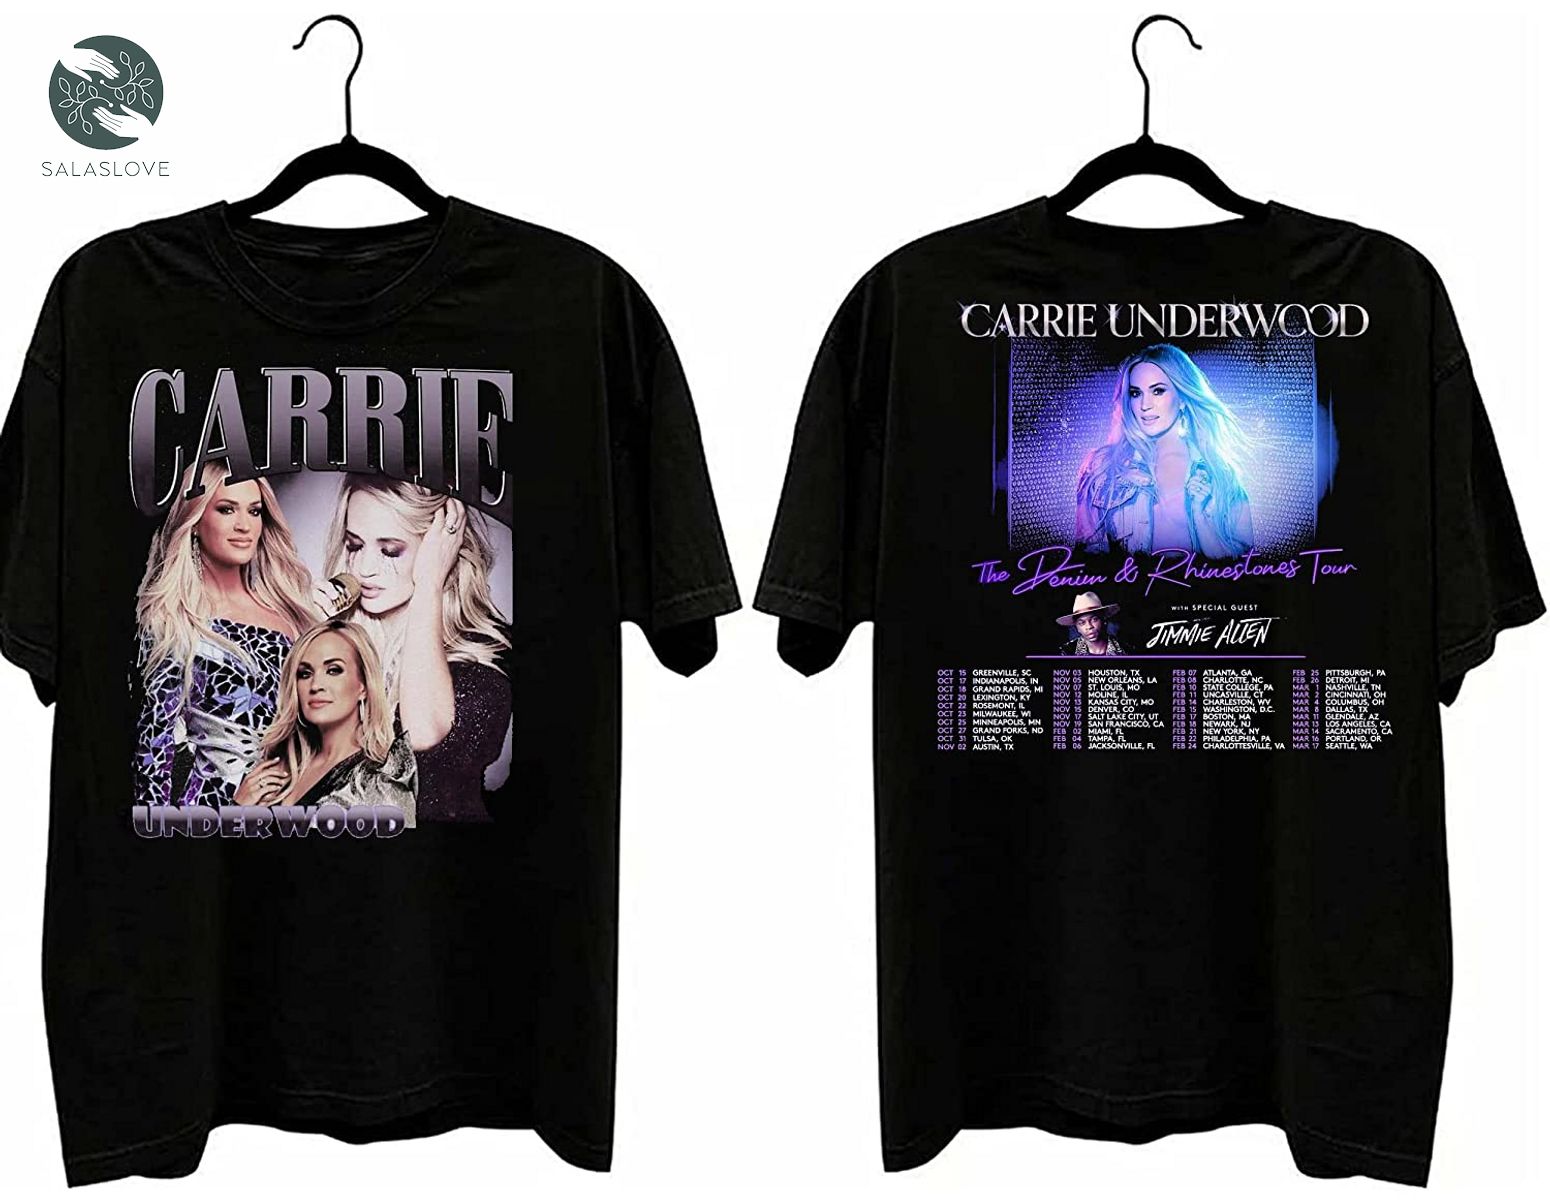 Denim and Rhinestones Tour Carrie Underwood Shirt Gift for Fans